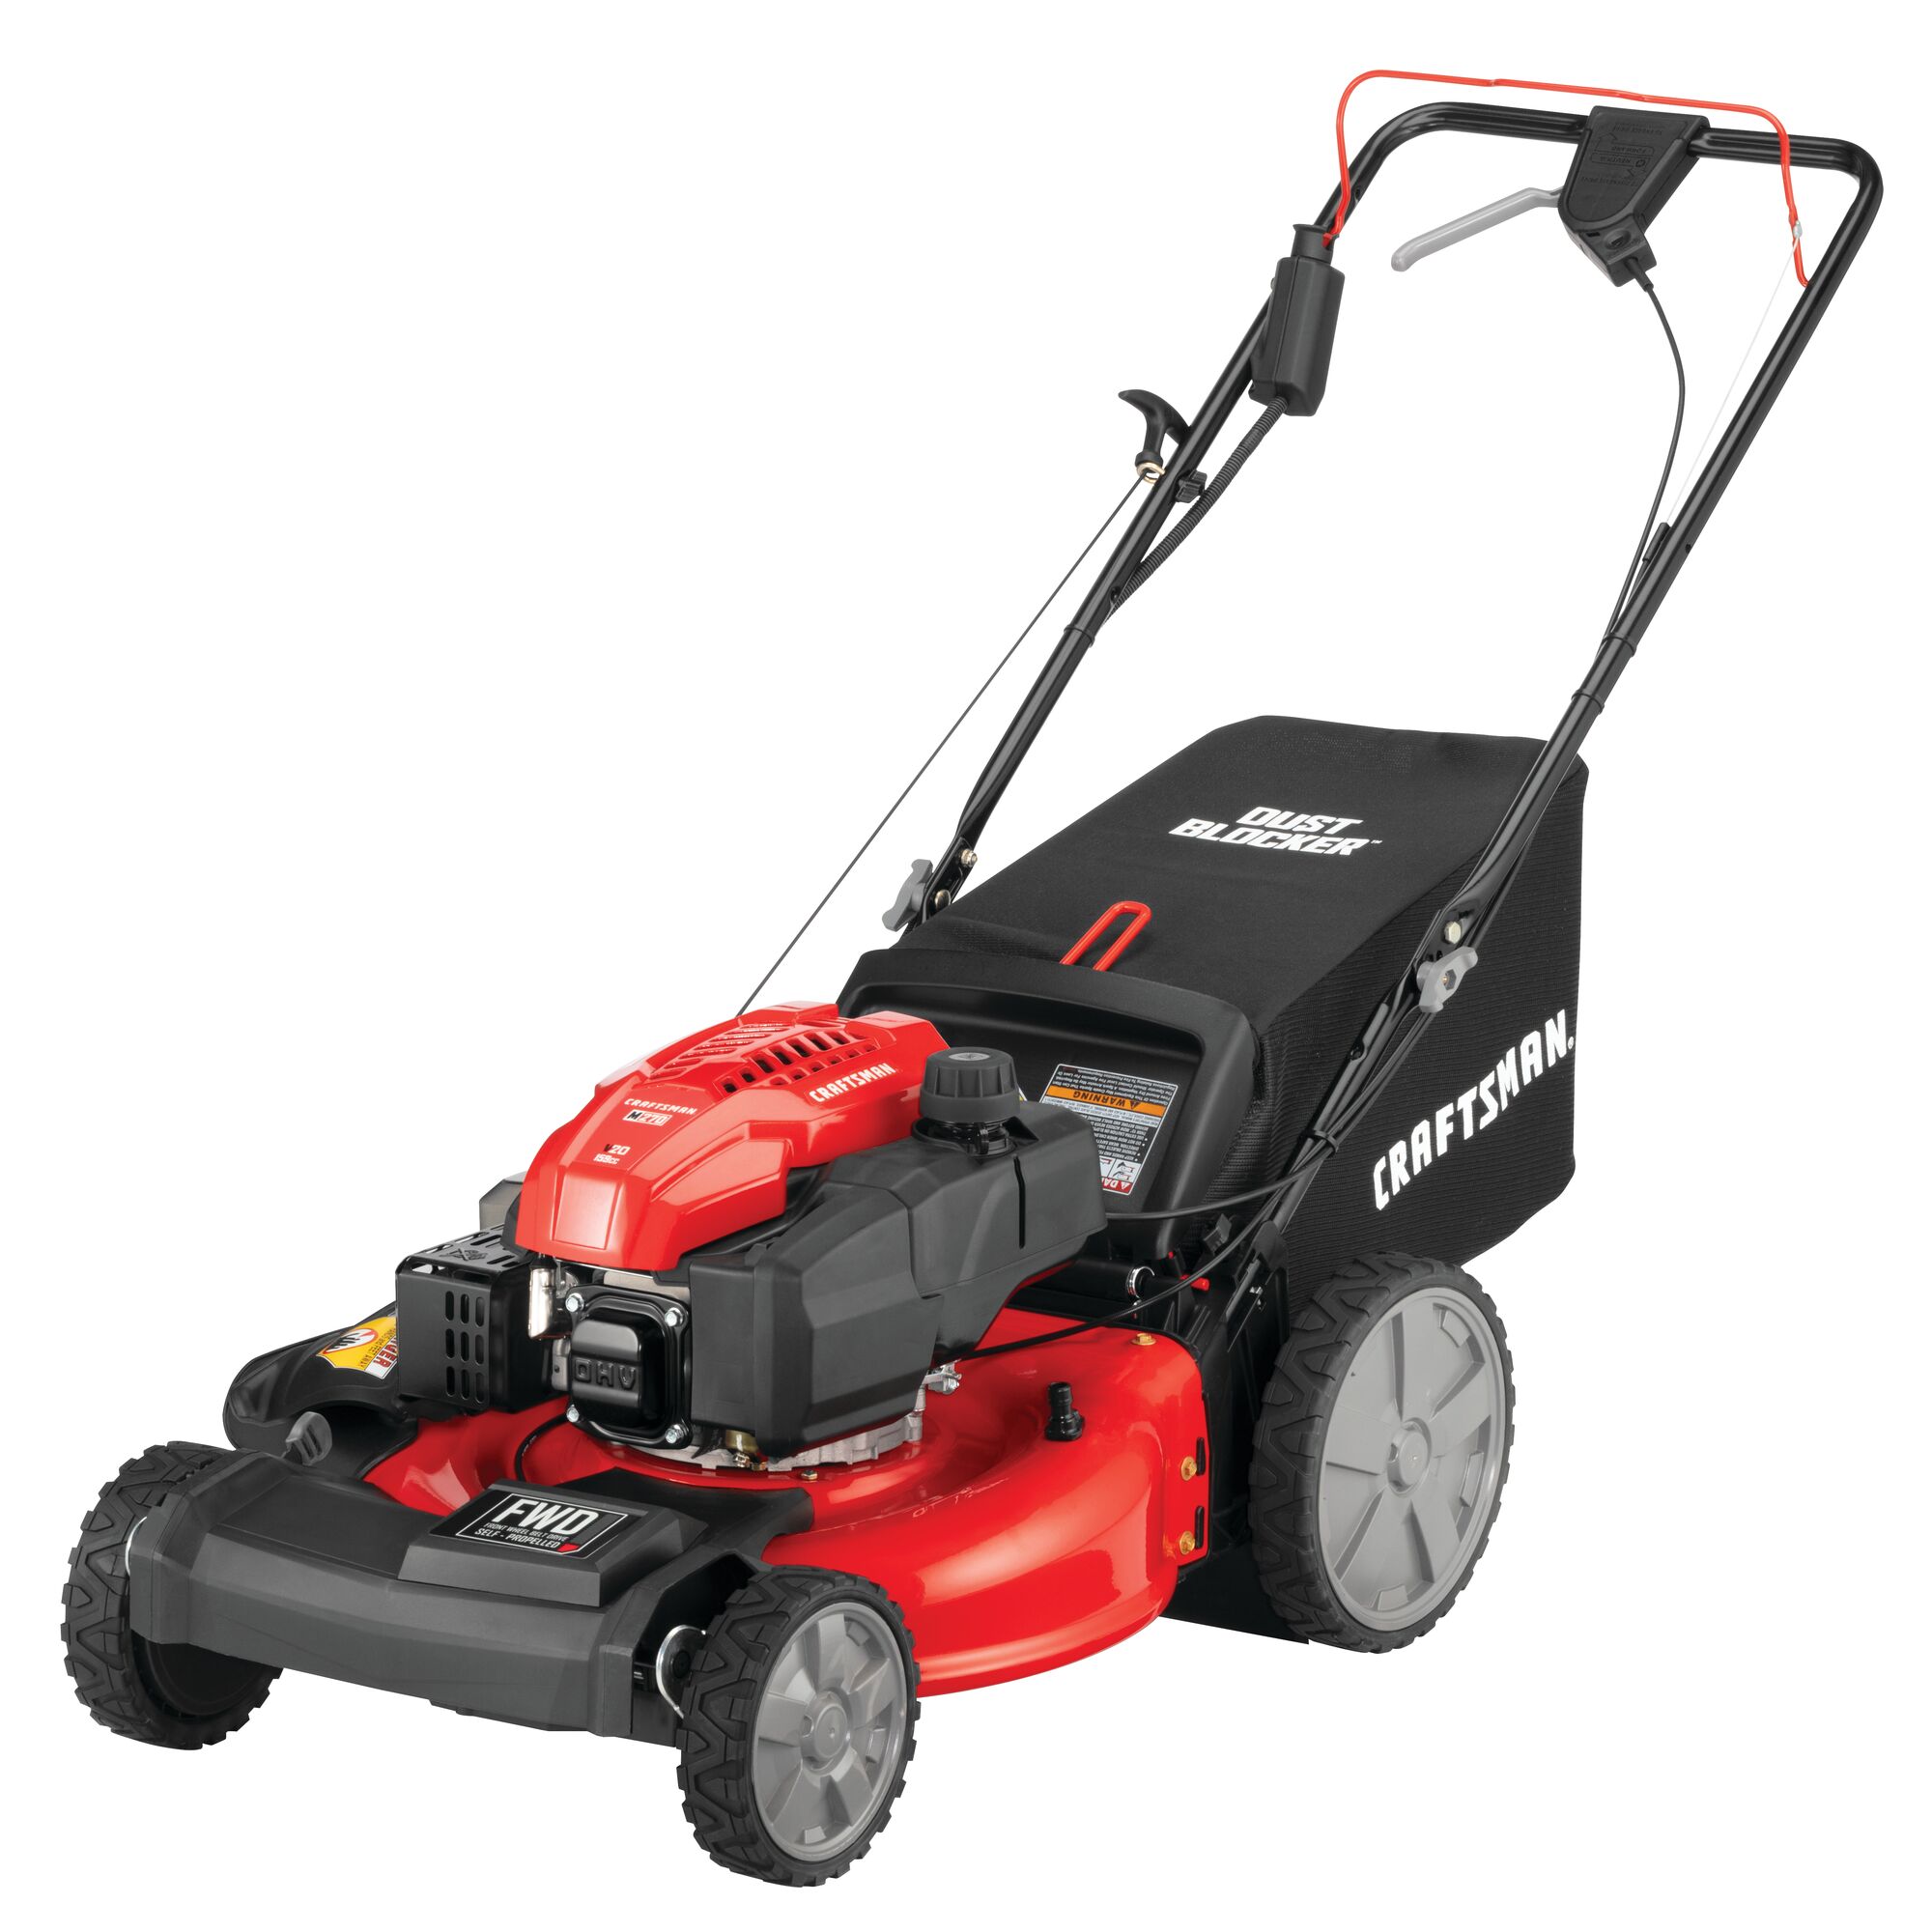 Profile of 21 inch 159 c c f w d self propelled mower with v 20 battery start.